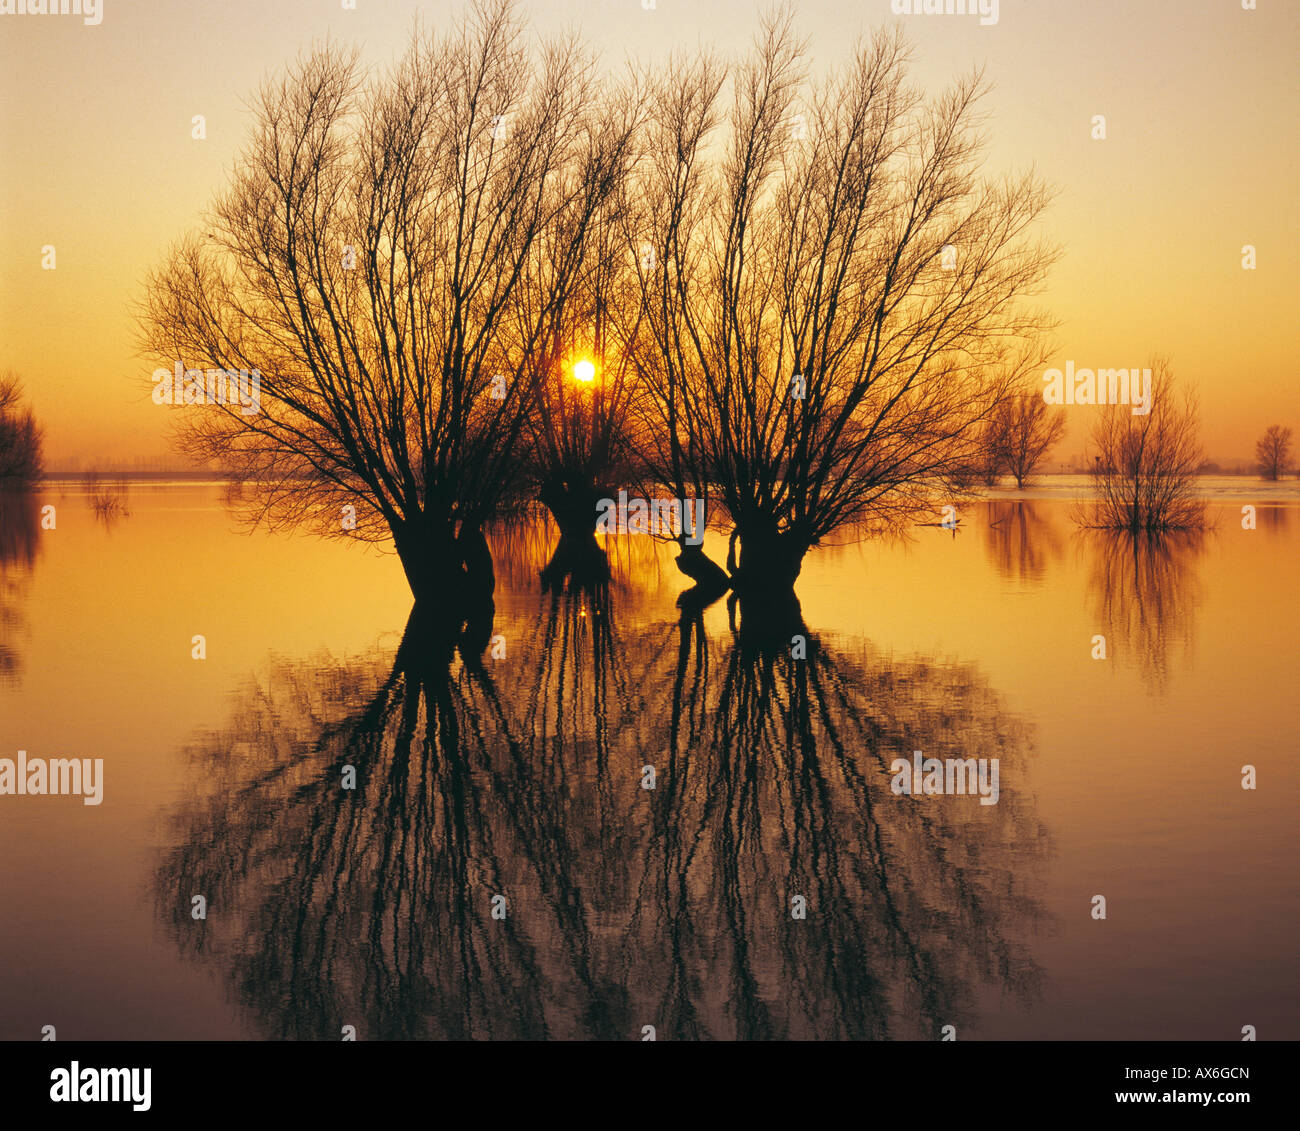 Silhouette of willow trees at dusk, River Ijssel, Netherlands Stock Photo